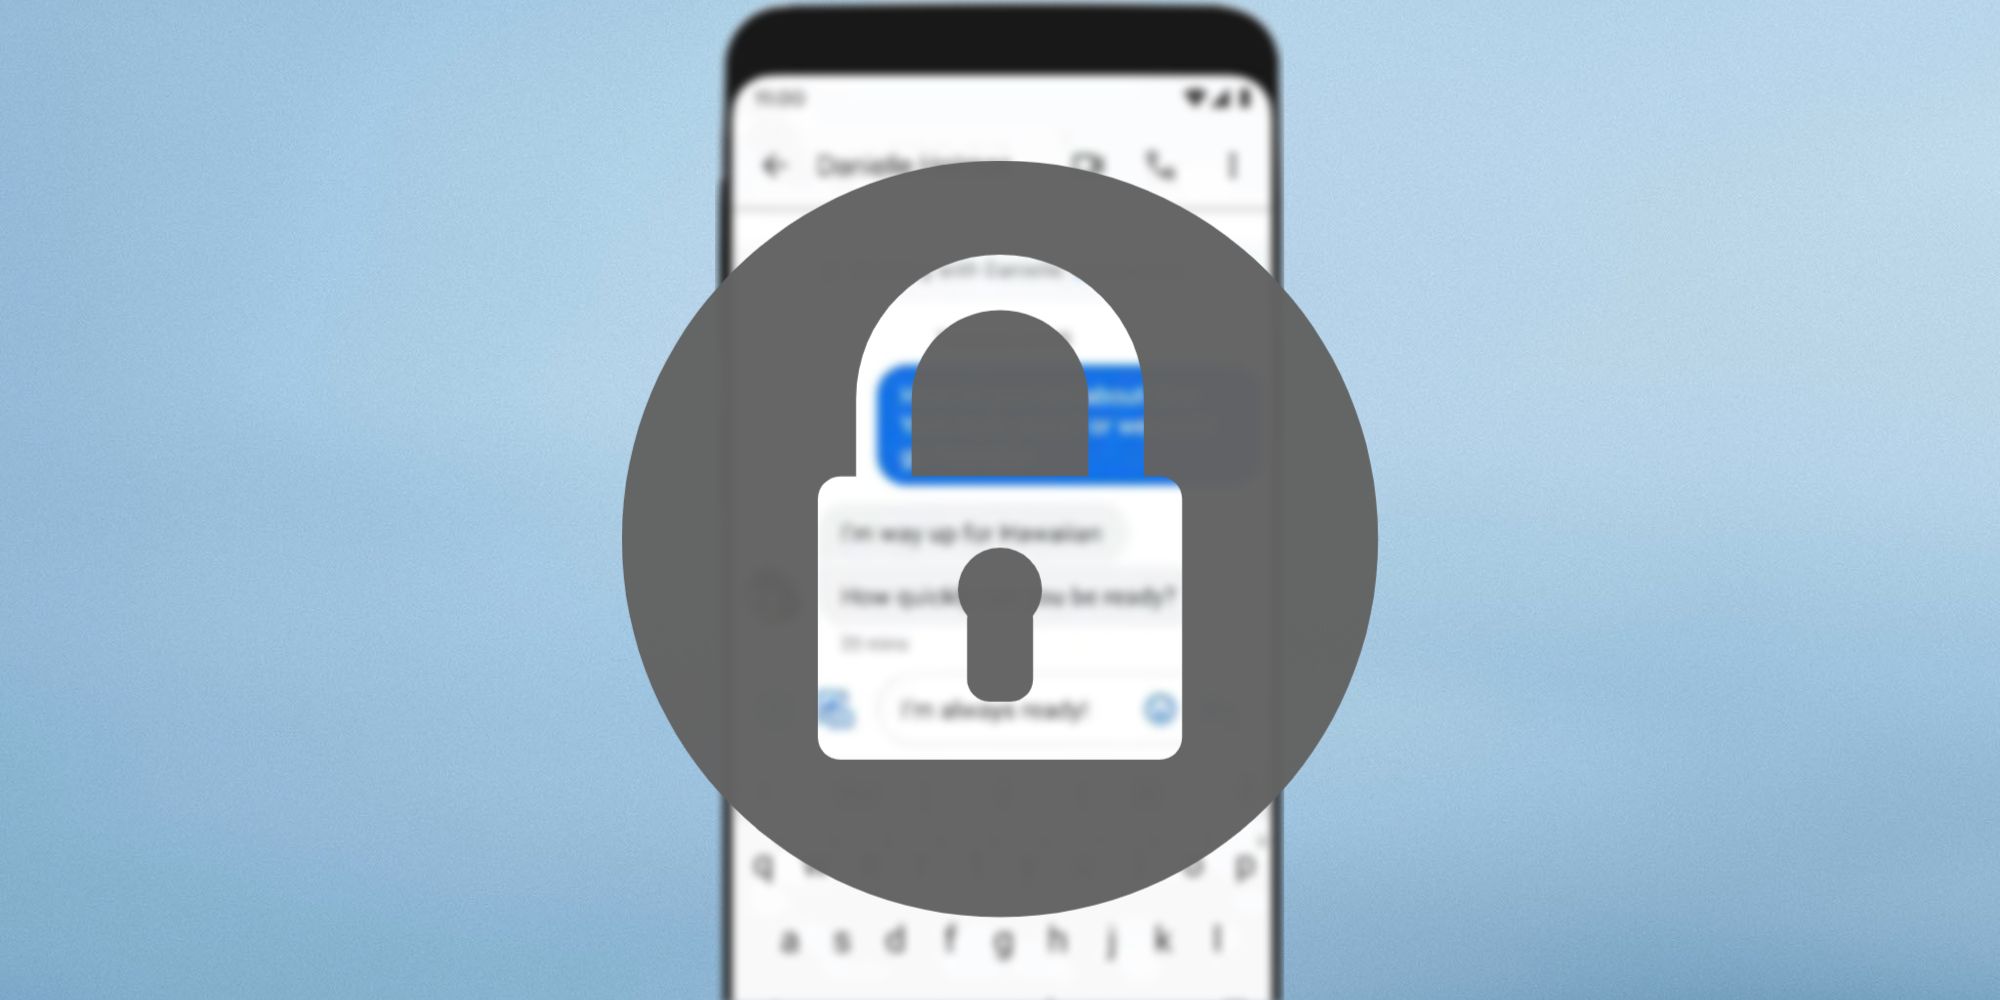 A lock icon with a key symbolizing privacy.